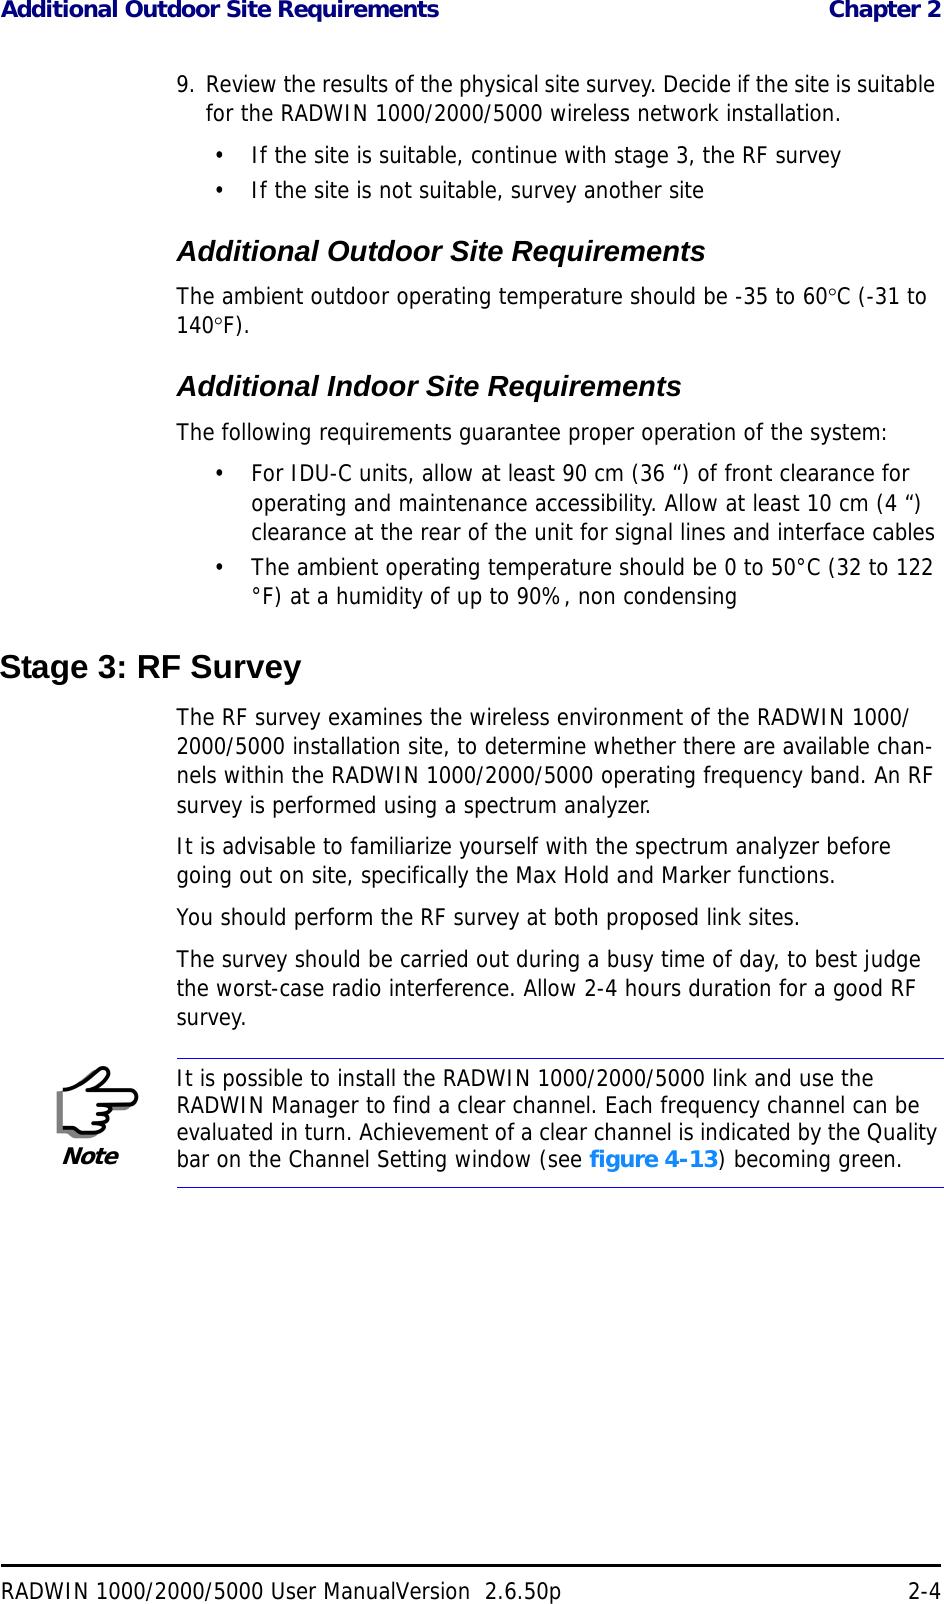 Additional Outdoor Site Requirements  Chapter 2RADWIN 1000/2000/5000 User ManualVersion  2.6.50p 2-49. Review the results of the physical site survey. Decide if the site is suitable for the RADWIN 1000/2000/5000 wireless network installation.• If the site is suitable, continue with stage 3, the RF survey• If the site is not suitable, survey another siteAdditional Outdoor Site RequirementsThe ambient outdoor operating temperature should be -35 to 60C (-31 to 140F).Additional Indoor Site RequirementsThe following requirements guarantee proper operation of the system:• For IDU-C units, allow at least 90 cm (36 “) of front clearance for operating and maintenance accessibility. Allow at least 10 cm (4 “) clearance at the rear of the unit for signal lines and interface cables• The ambient operating temperature should be 0 to 50°C (32 to 122 °F) at a humidity of up to 90%, non condensingStage 3: RF SurveyThe RF survey examines the wireless environment of the RADWIN 1000/2000/5000 installation site, to determine whether there are available chan-nels within the RADWIN 1000/2000/5000 operating frequency band. An RF survey is performed using a spectrum analyzer.It is advisable to familiarize yourself with the spectrum analyzer before going out on site, specifically the Max Hold and Marker functions.You should perform the RF survey at both proposed link sites.The survey should be carried out during a busy time of day, to best judge the worst-case radio interference. Allow 2-4 hours duration for a good RF survey.NoteIt is possible to install the RADWIN 1000/2000/5000 link and use the RADWIN Manager to find a clear channel. Each frequency channel can be evaluated in turn. Achievement of a clear channel is indicated by the Quality bar on the Channel Setting window (see figure 4-13) becoming green.